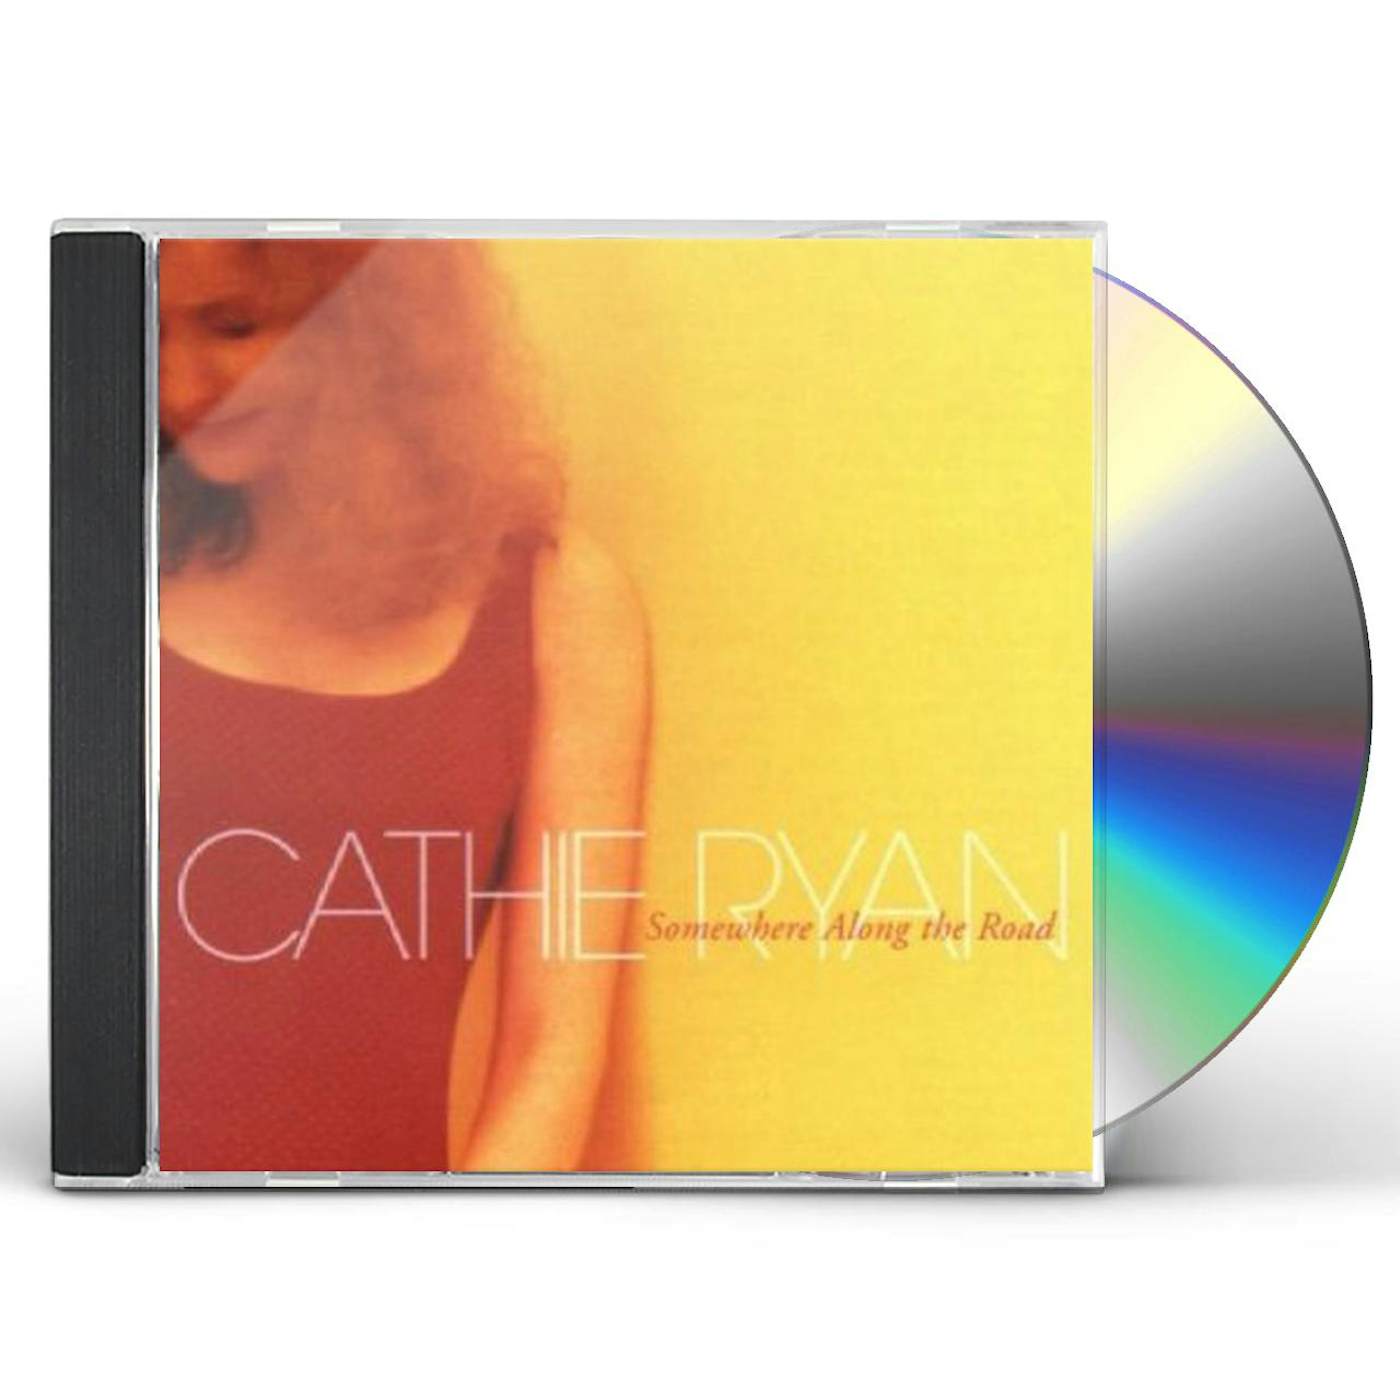 Cathie Ryan SOMEWHERE ALONG THE ROAD CD